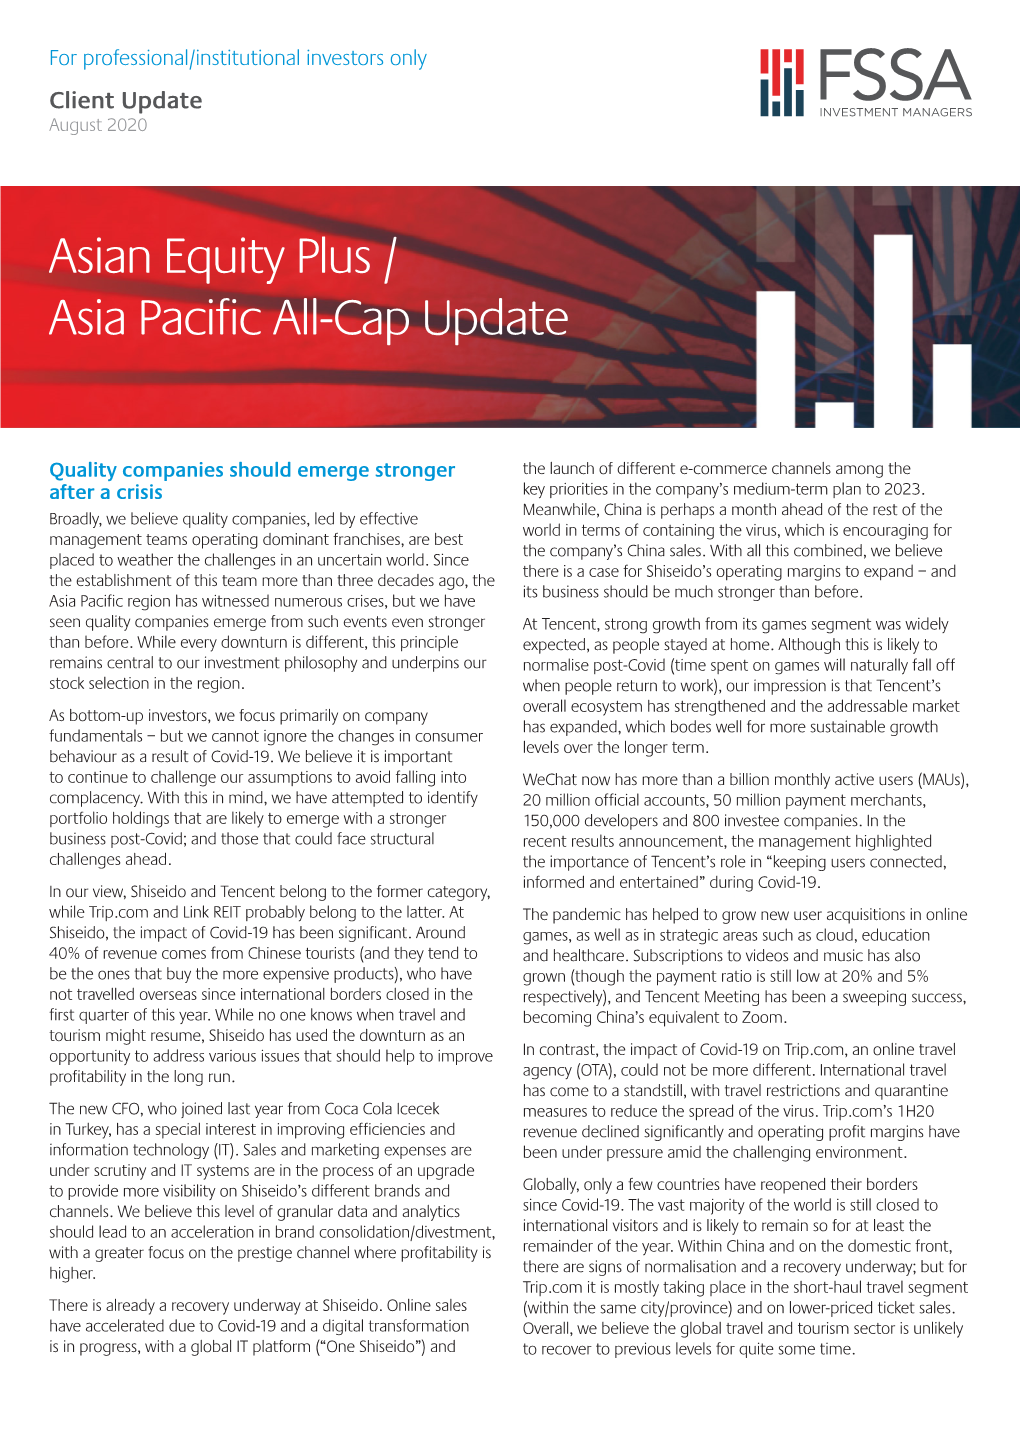 Asian Equity Plus / Asia Pacific All-Cap Update